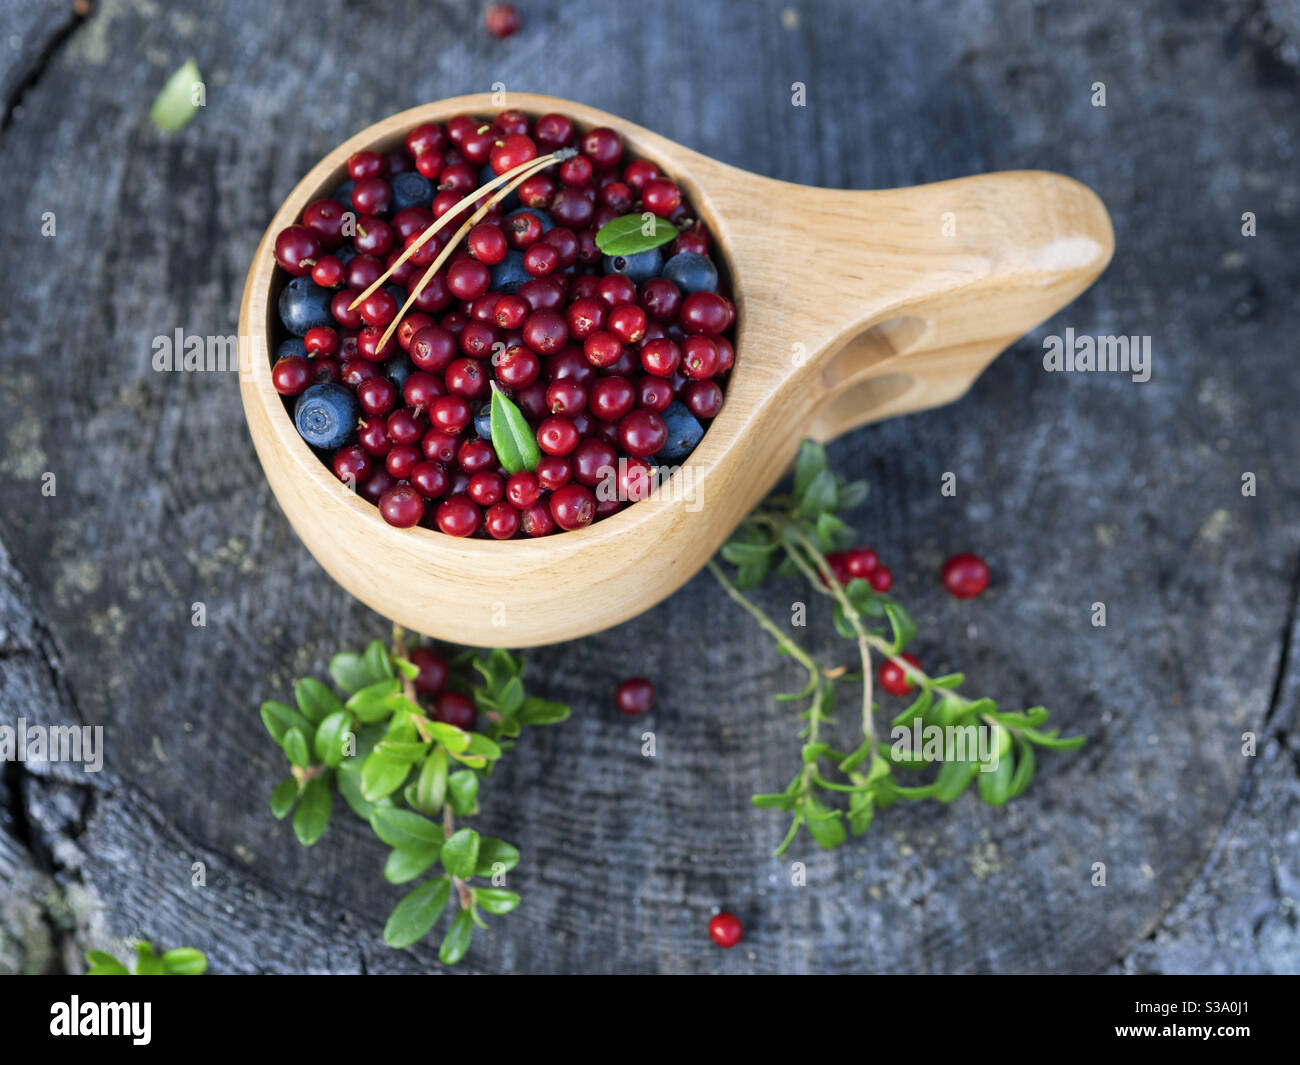 Fresh lingonberries in a wooden mug on a stump in a forest. Delicious and healthy food concept. Stock Photo